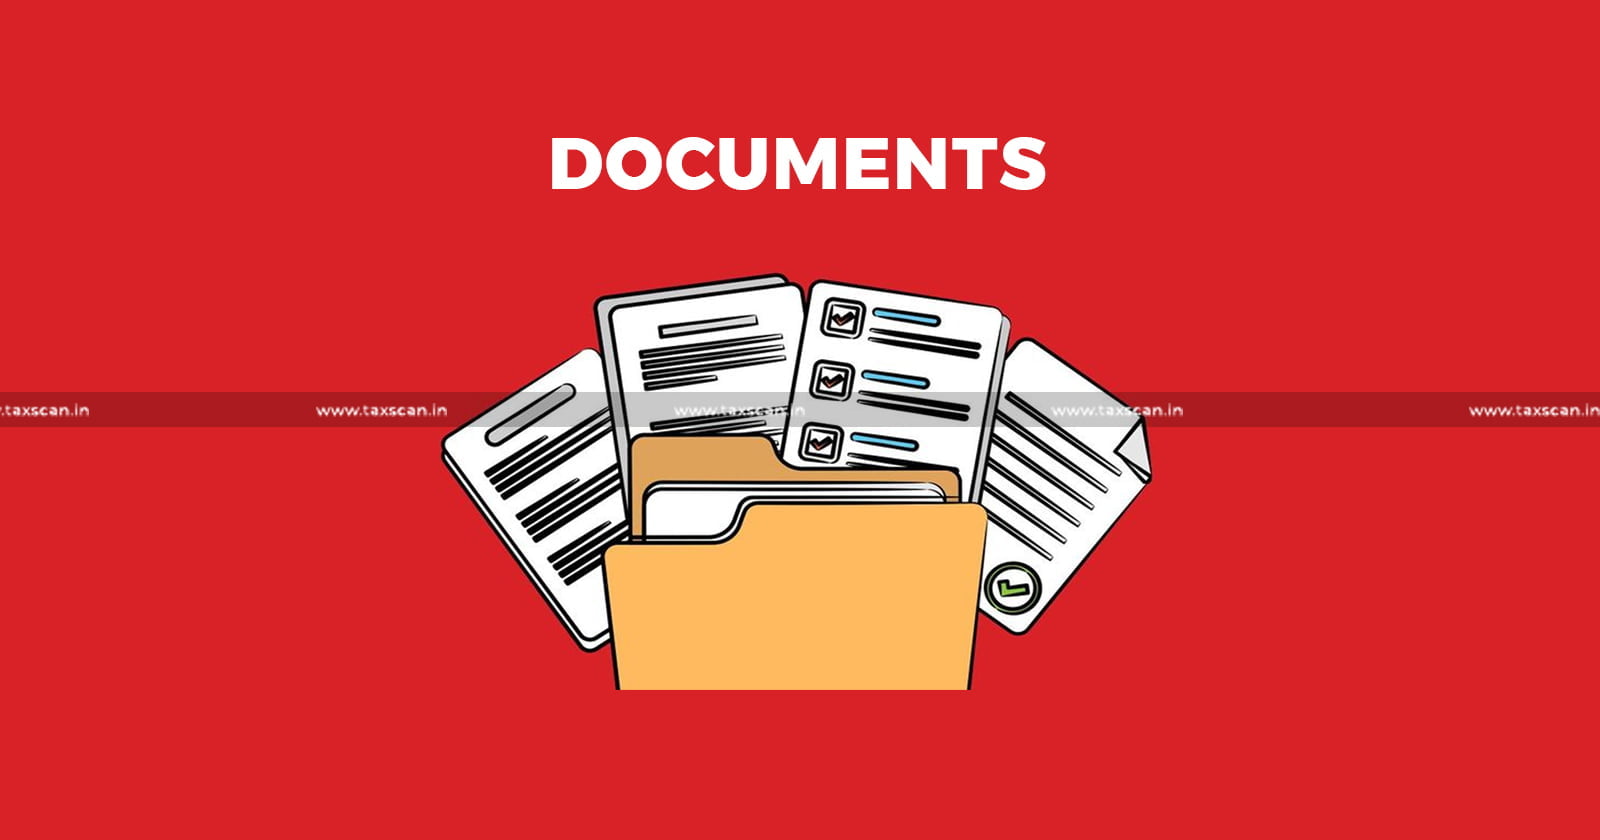 Addition - Documents found - Documents - ITAT - Income Tax - Tax - taxscan